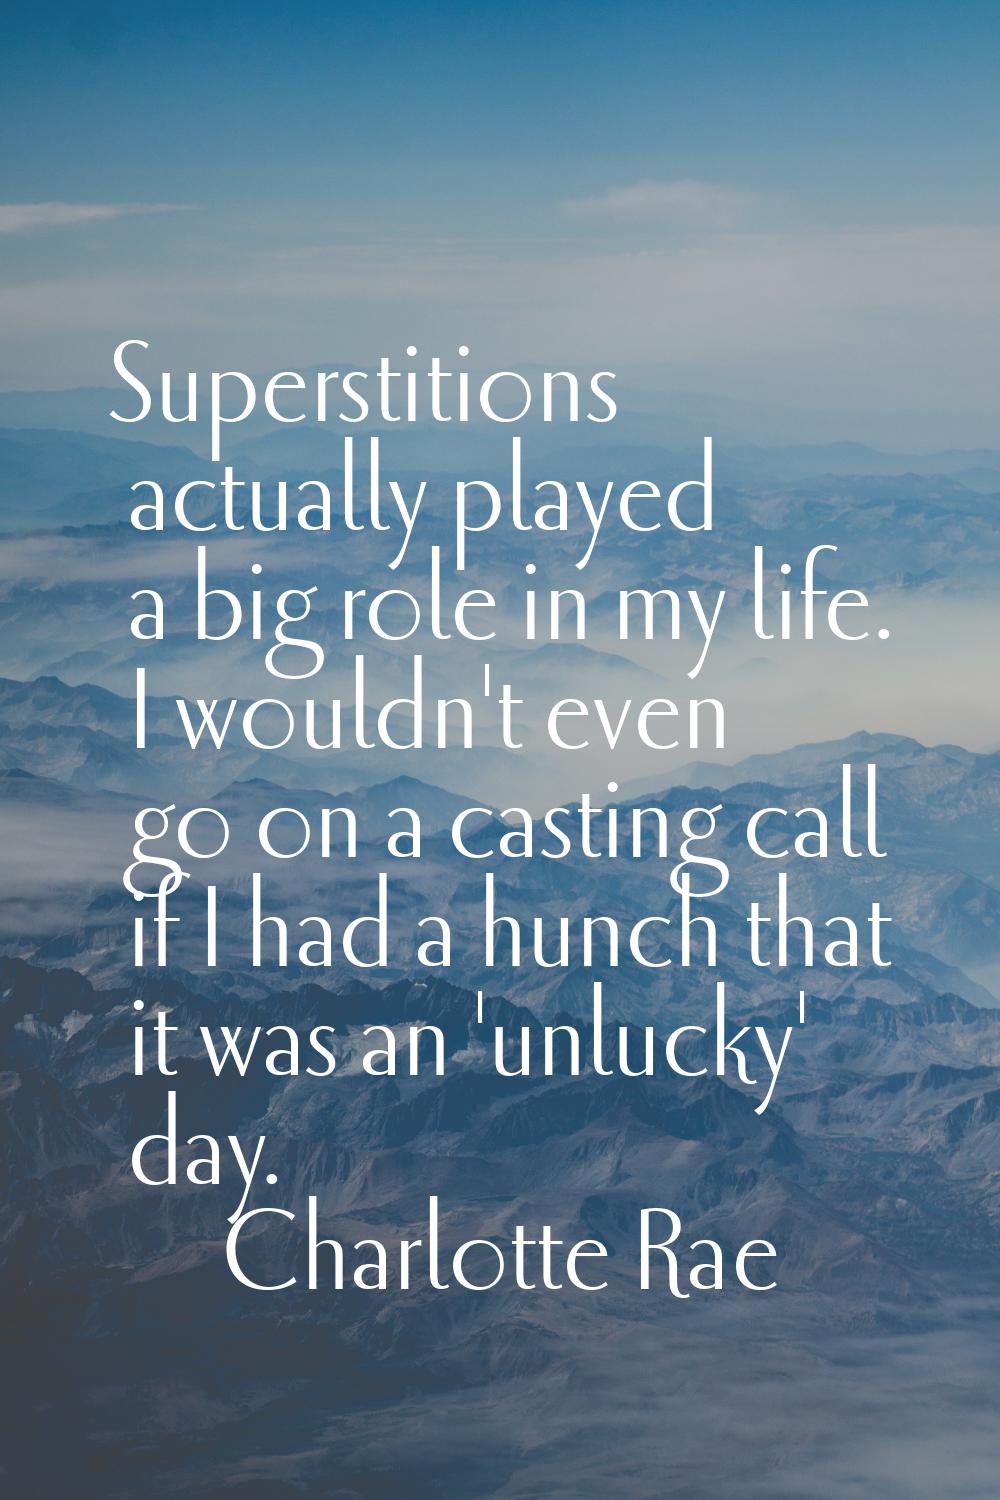 Superstitions actually played a big role in my life. I wouldn't even go on a casting call if I had 